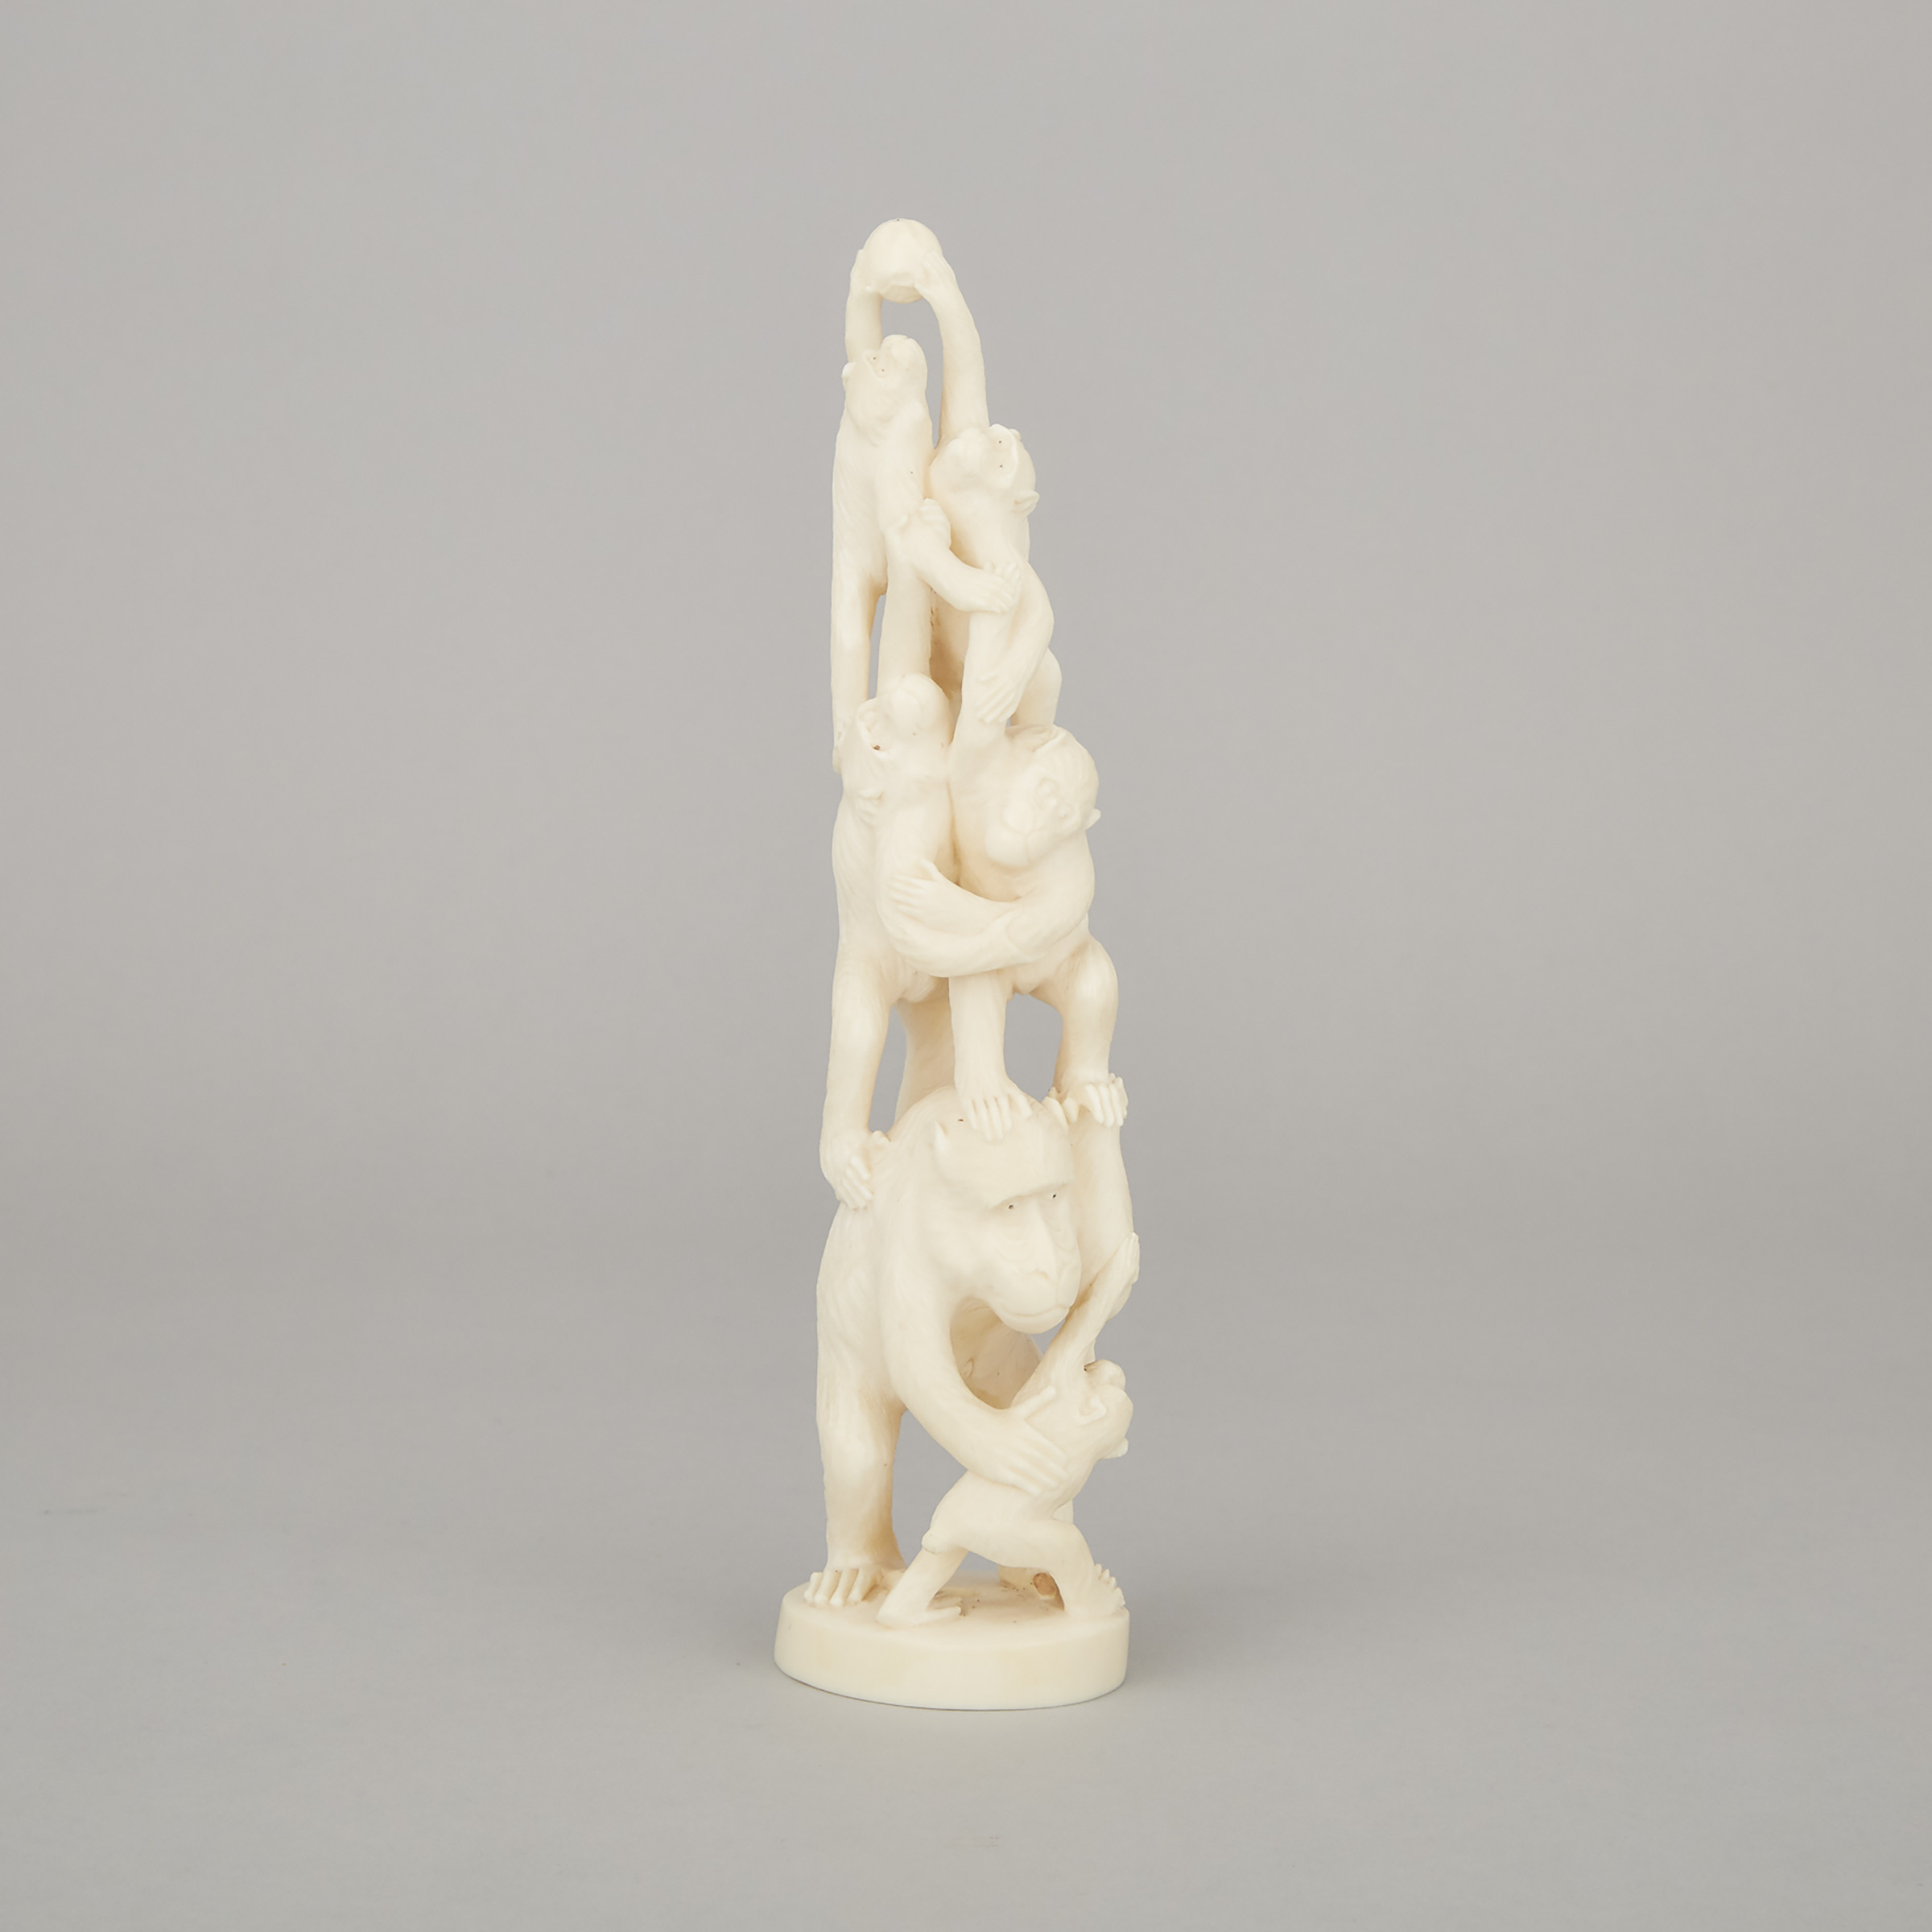 A Carved Ivory Monkey Group, Early 20th Century